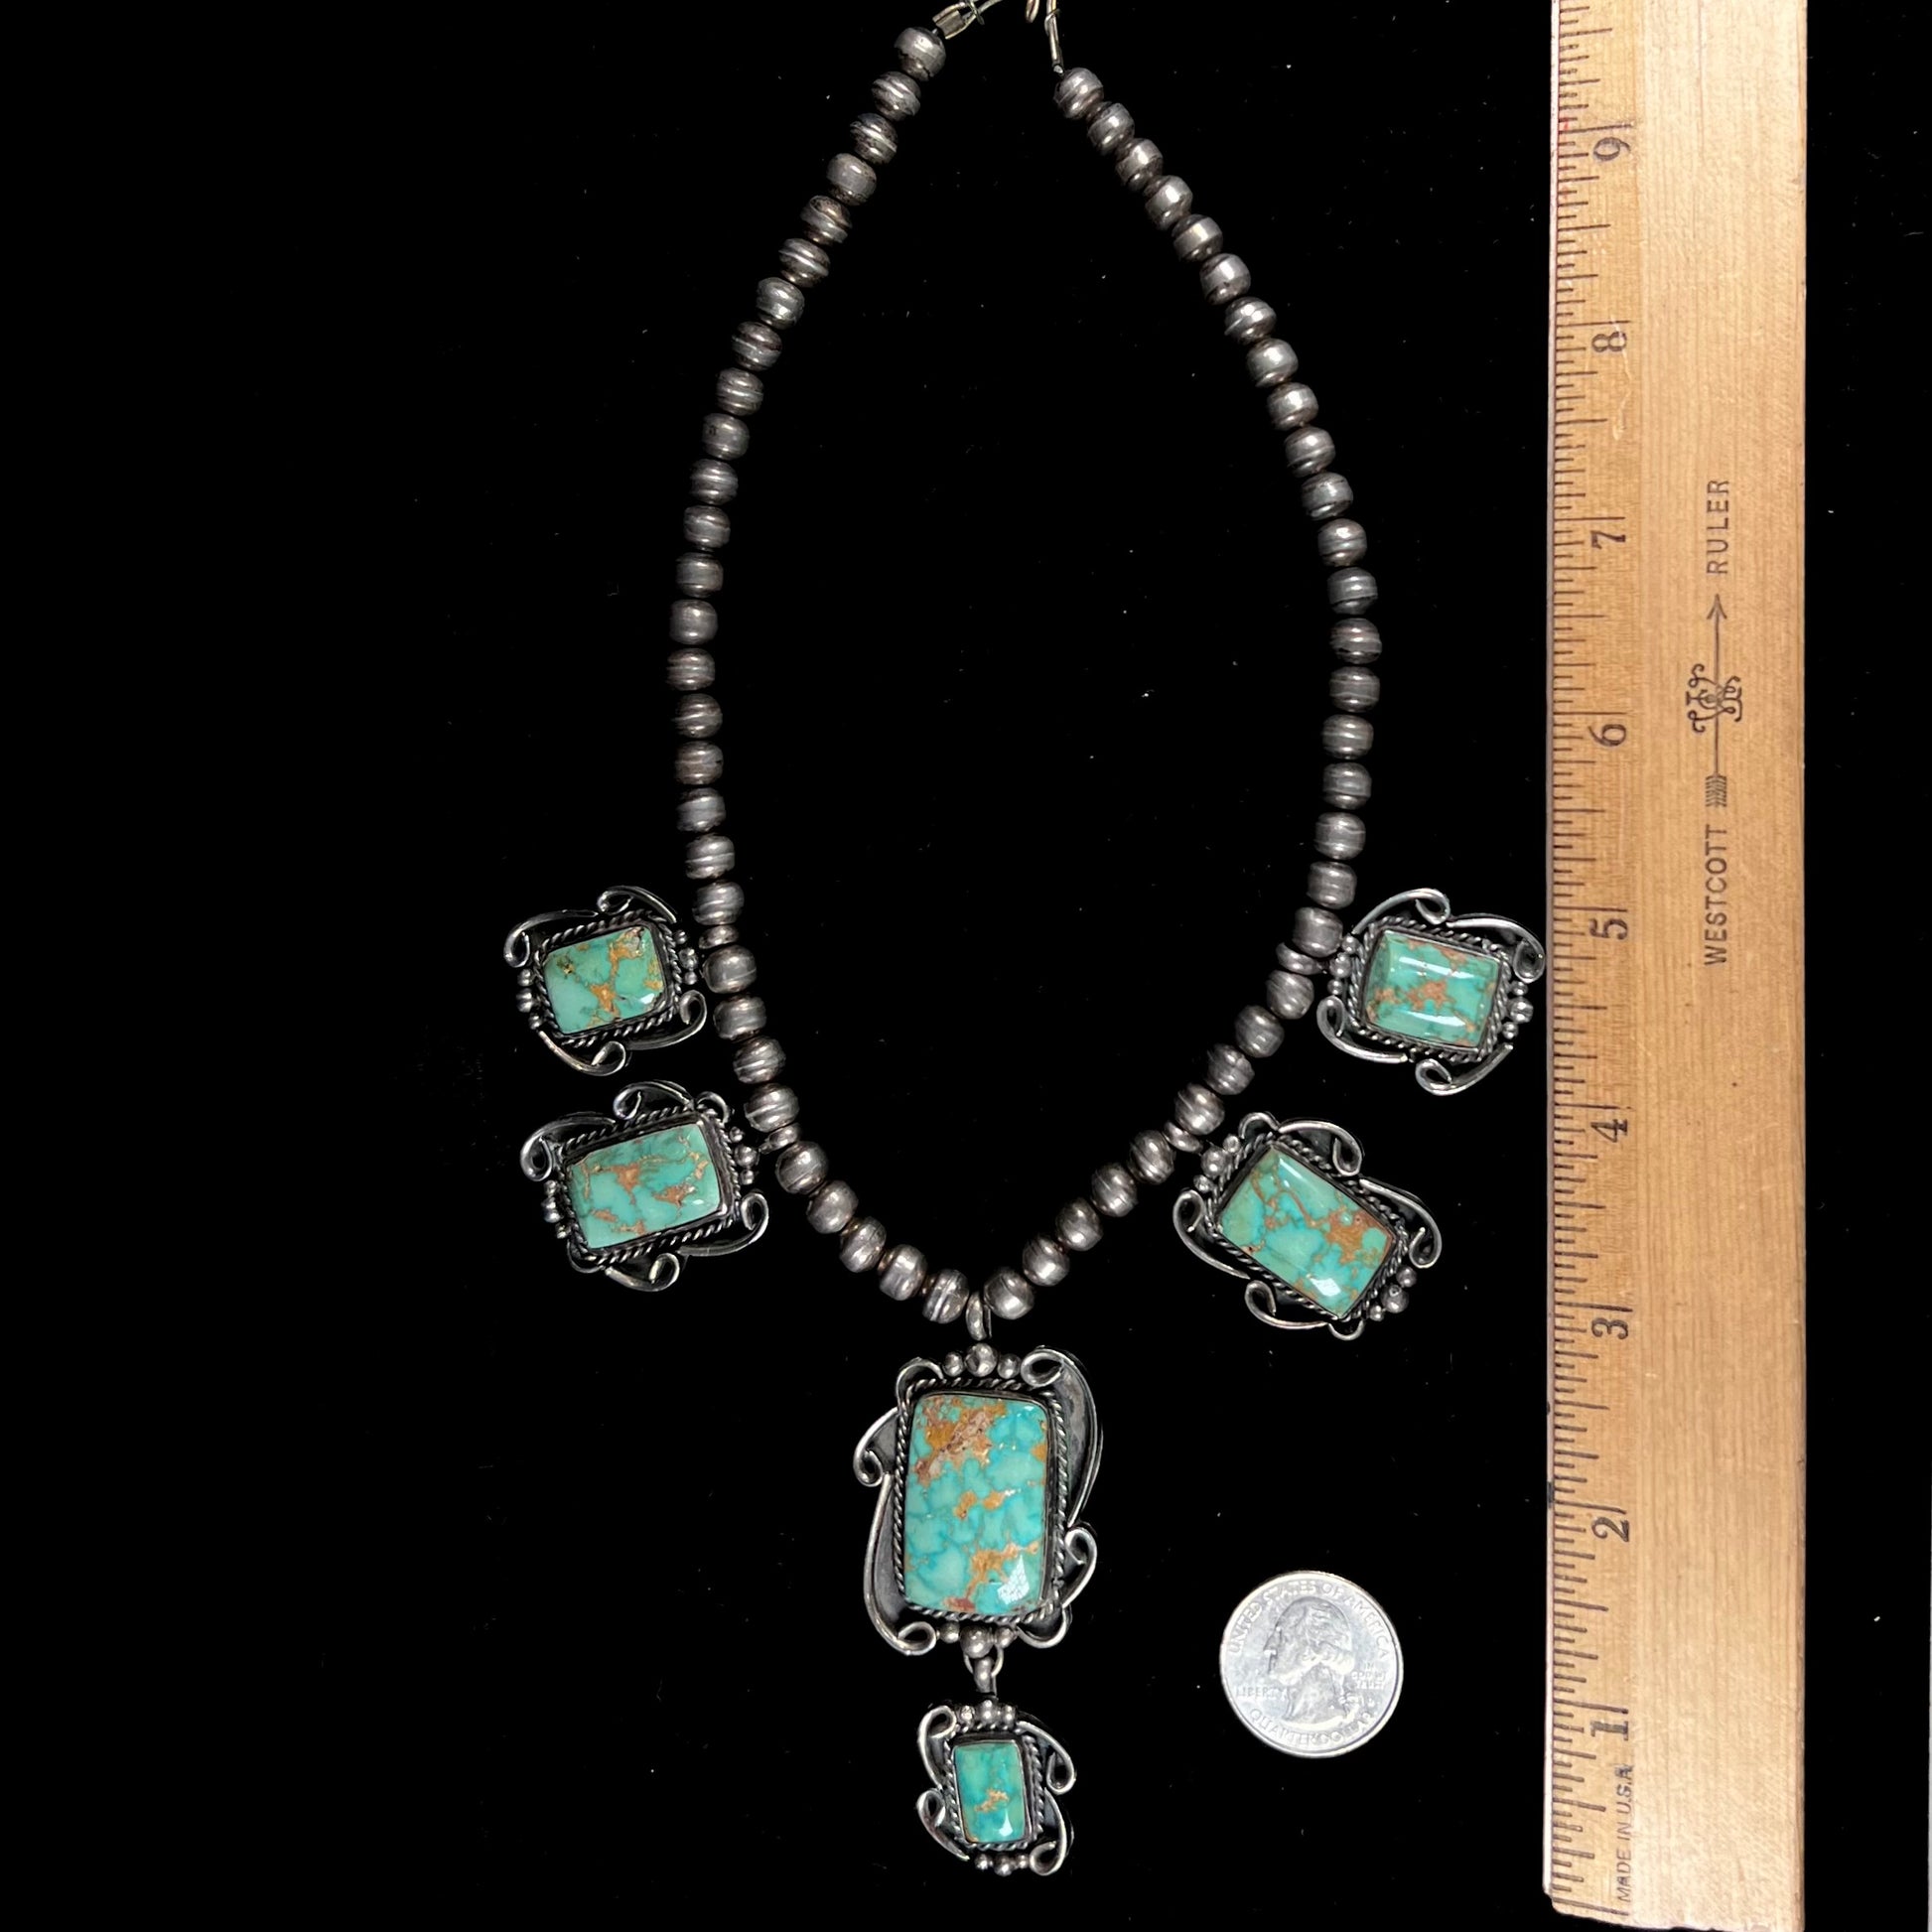 A sterling silver Navajo turquoise necklace set with Pilot Mountain Mine turquoise stones by artist Minnie Thomas.